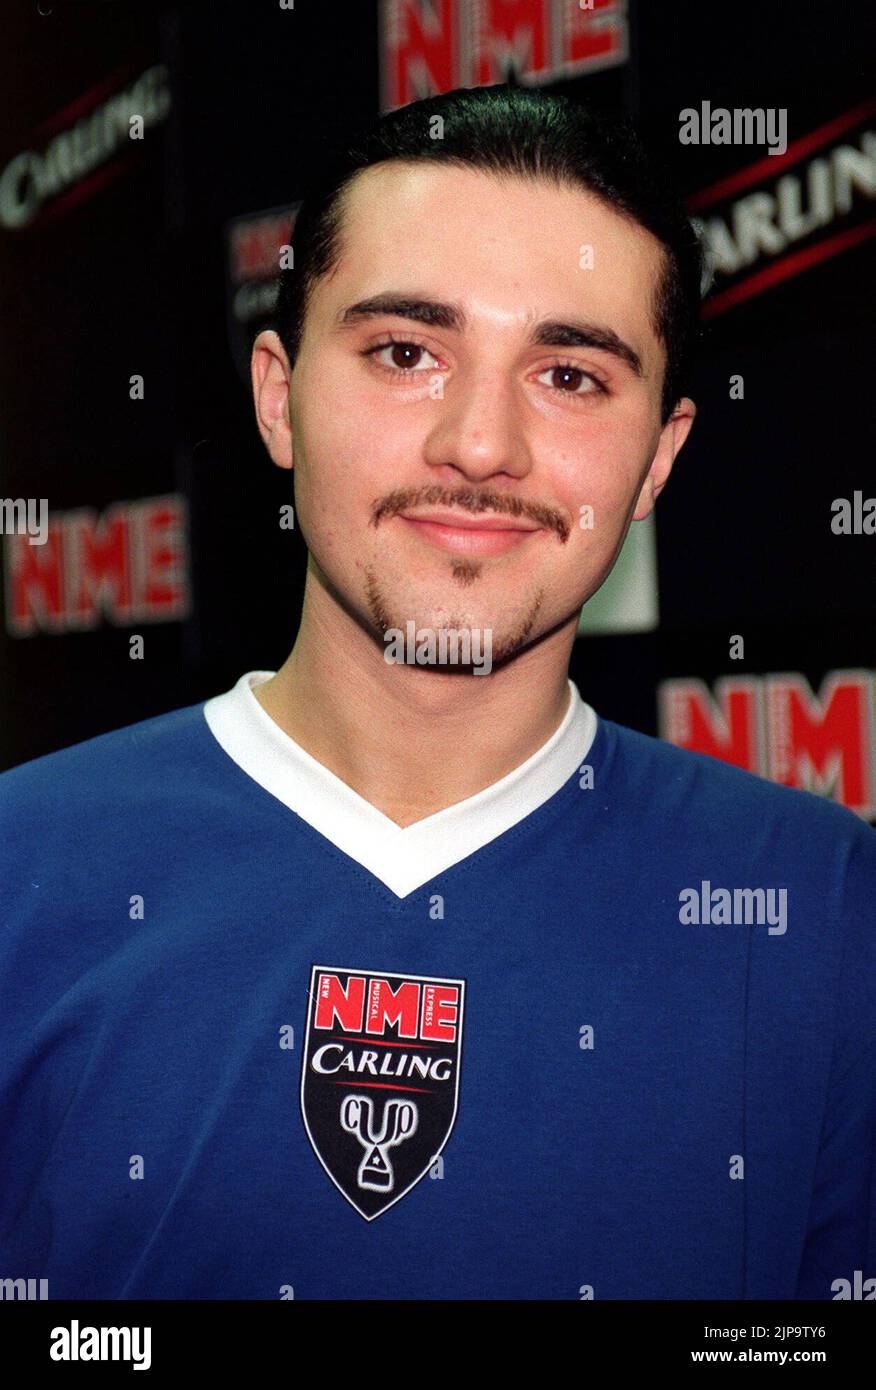 File photo dated 4/2/2001 of singer Darius, a reject from ITV television's Popstars show, at the NME Carling Cup charity celebrity football event, in aid of NSPCC, held at the Crystal Palace National Indoor Arena, in south London. Former Pop Idol contestant and theatre star Darius Campbell Danesh has been found dead in his US apartment room at the age of 41, his family announced. Issue date: Tuesday August 16, 2022. Stock Photo